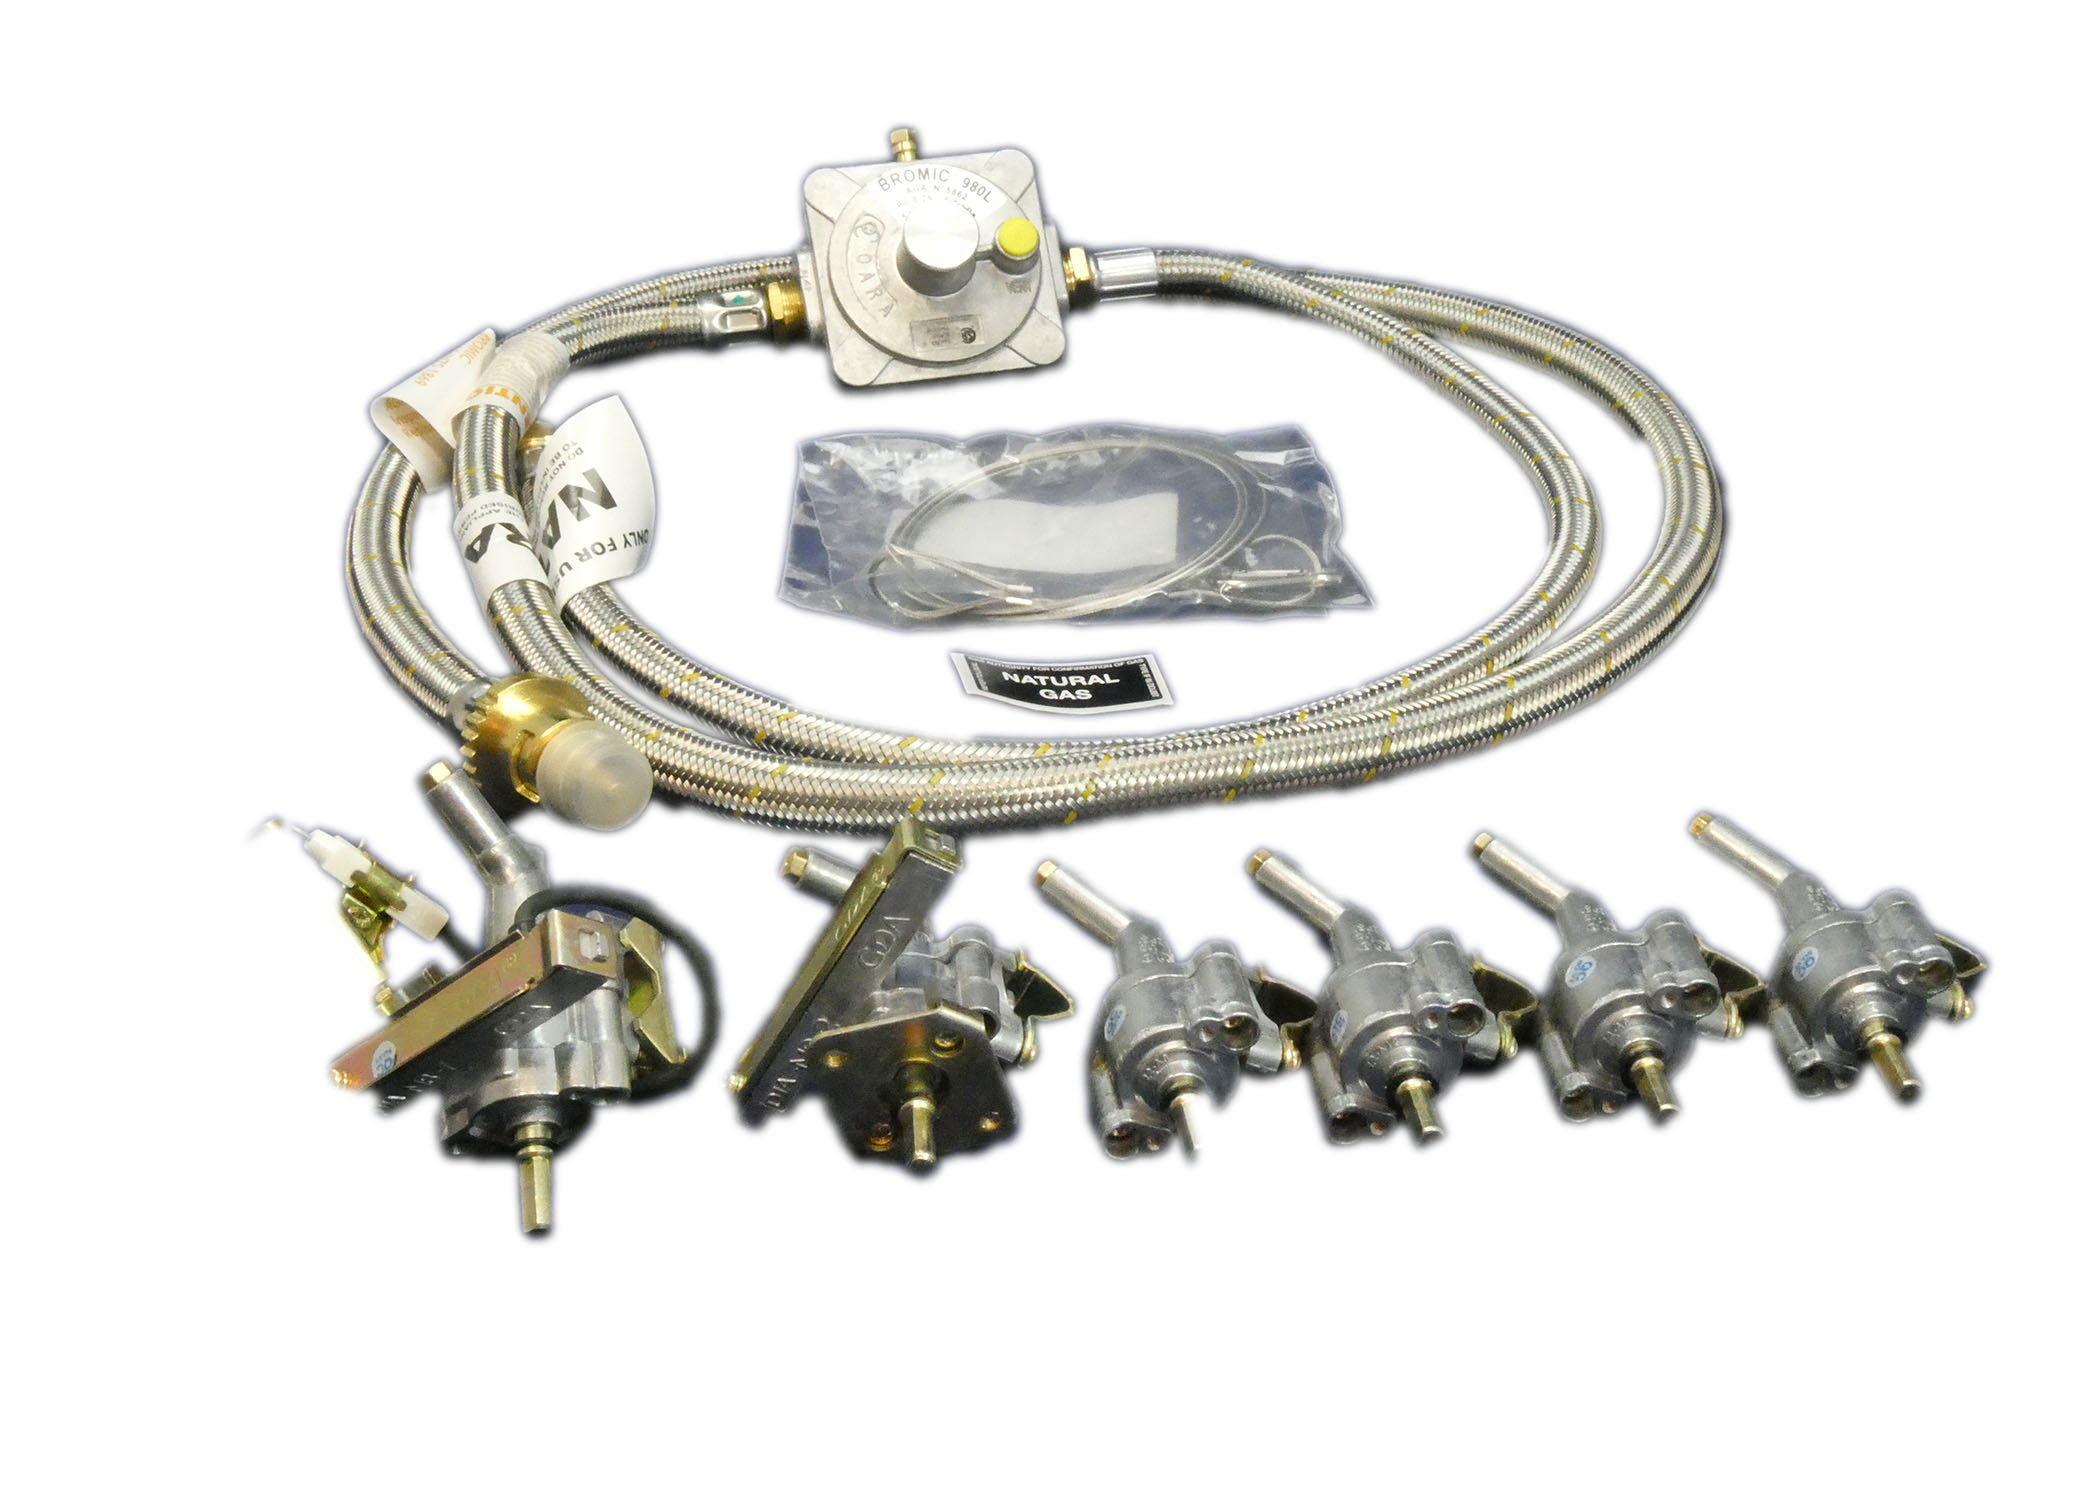 /globalassets/images/spares-images/bd6192_conversion-kit_natrual_gas_discovery-1000e-series_barbecues_accessories_installation.jpg